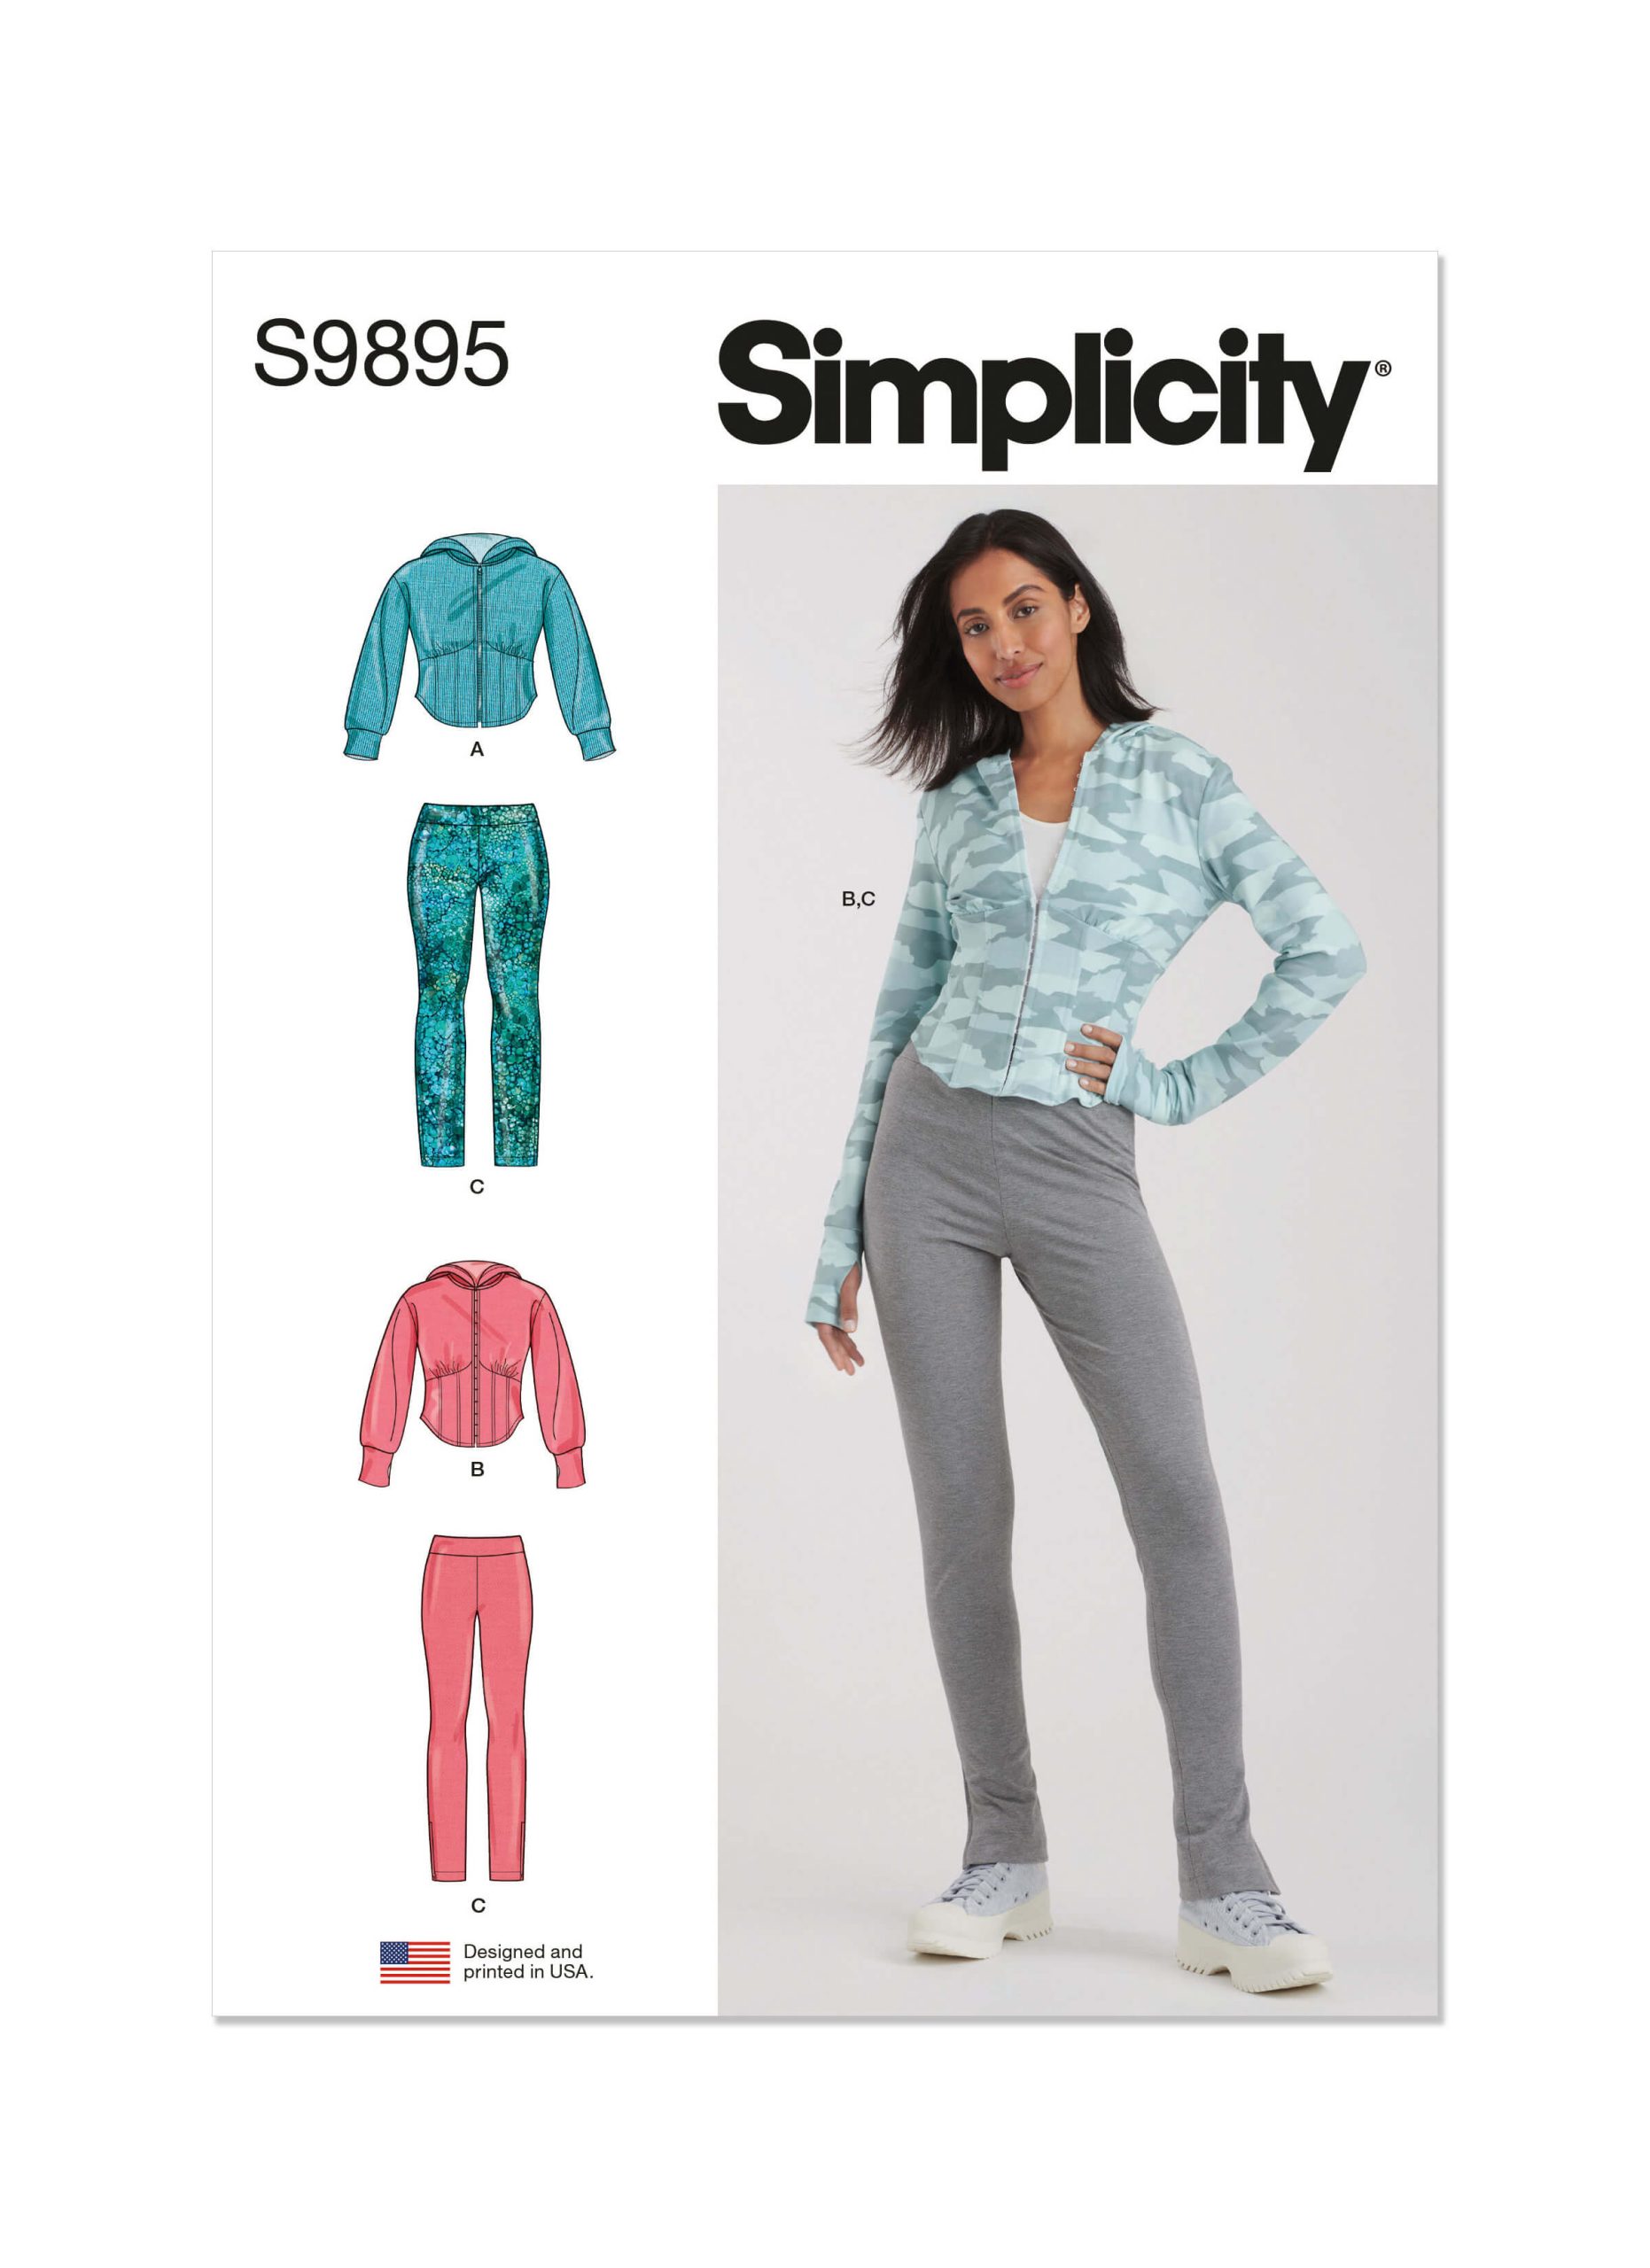 Simplicity Sewing Pattern S9895 Misses' and Women's Jacket and Knit Leggings  - Sewdirect